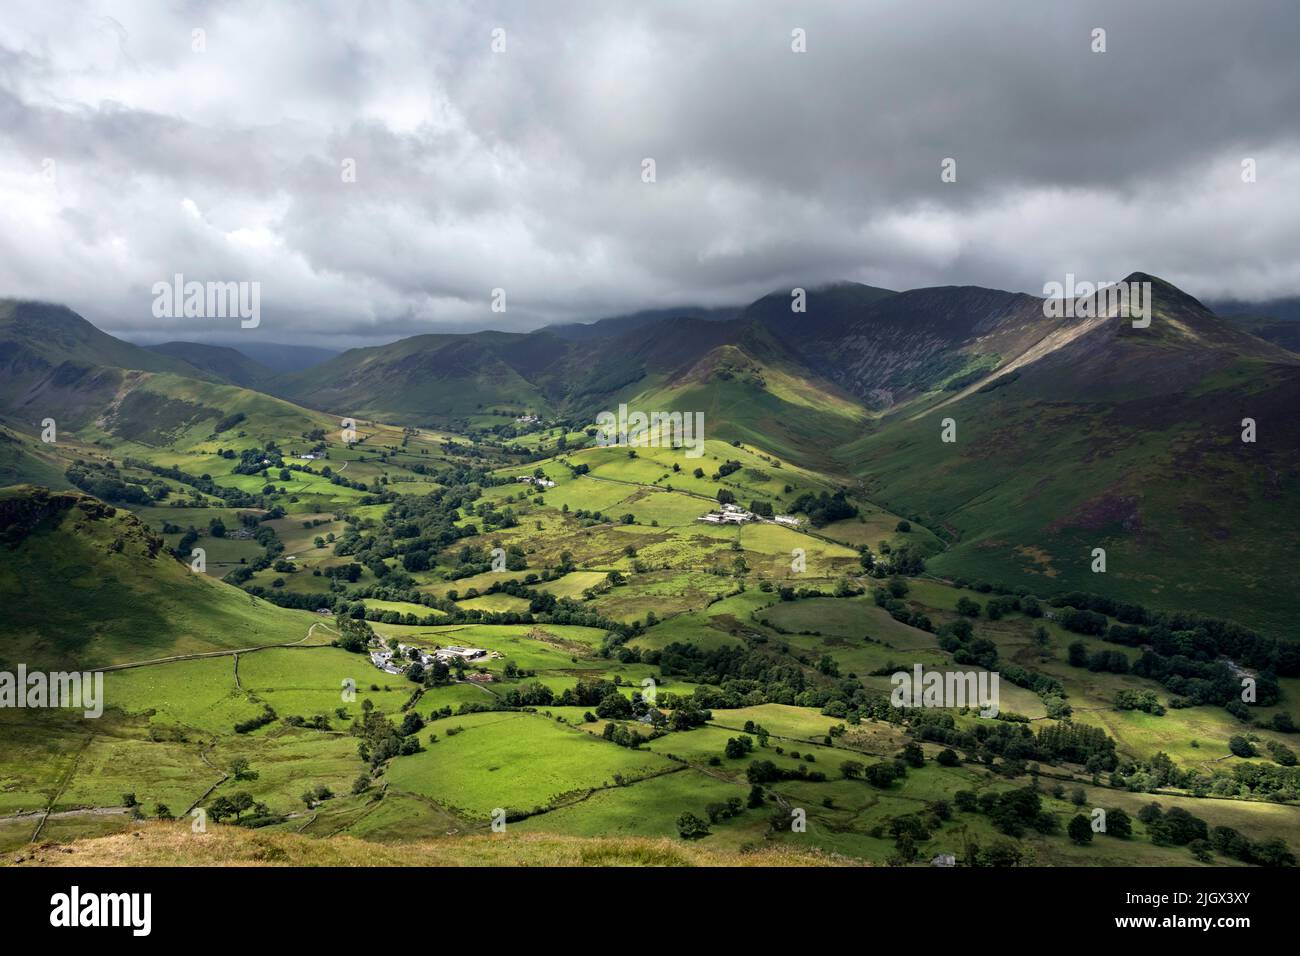 The view over the Newlands valley towards Causey Pike, Scar Crags, Crag Hill and Ard Crags from the summit of Cat Bells, Lake District, Cumbria, UK Stock Photo